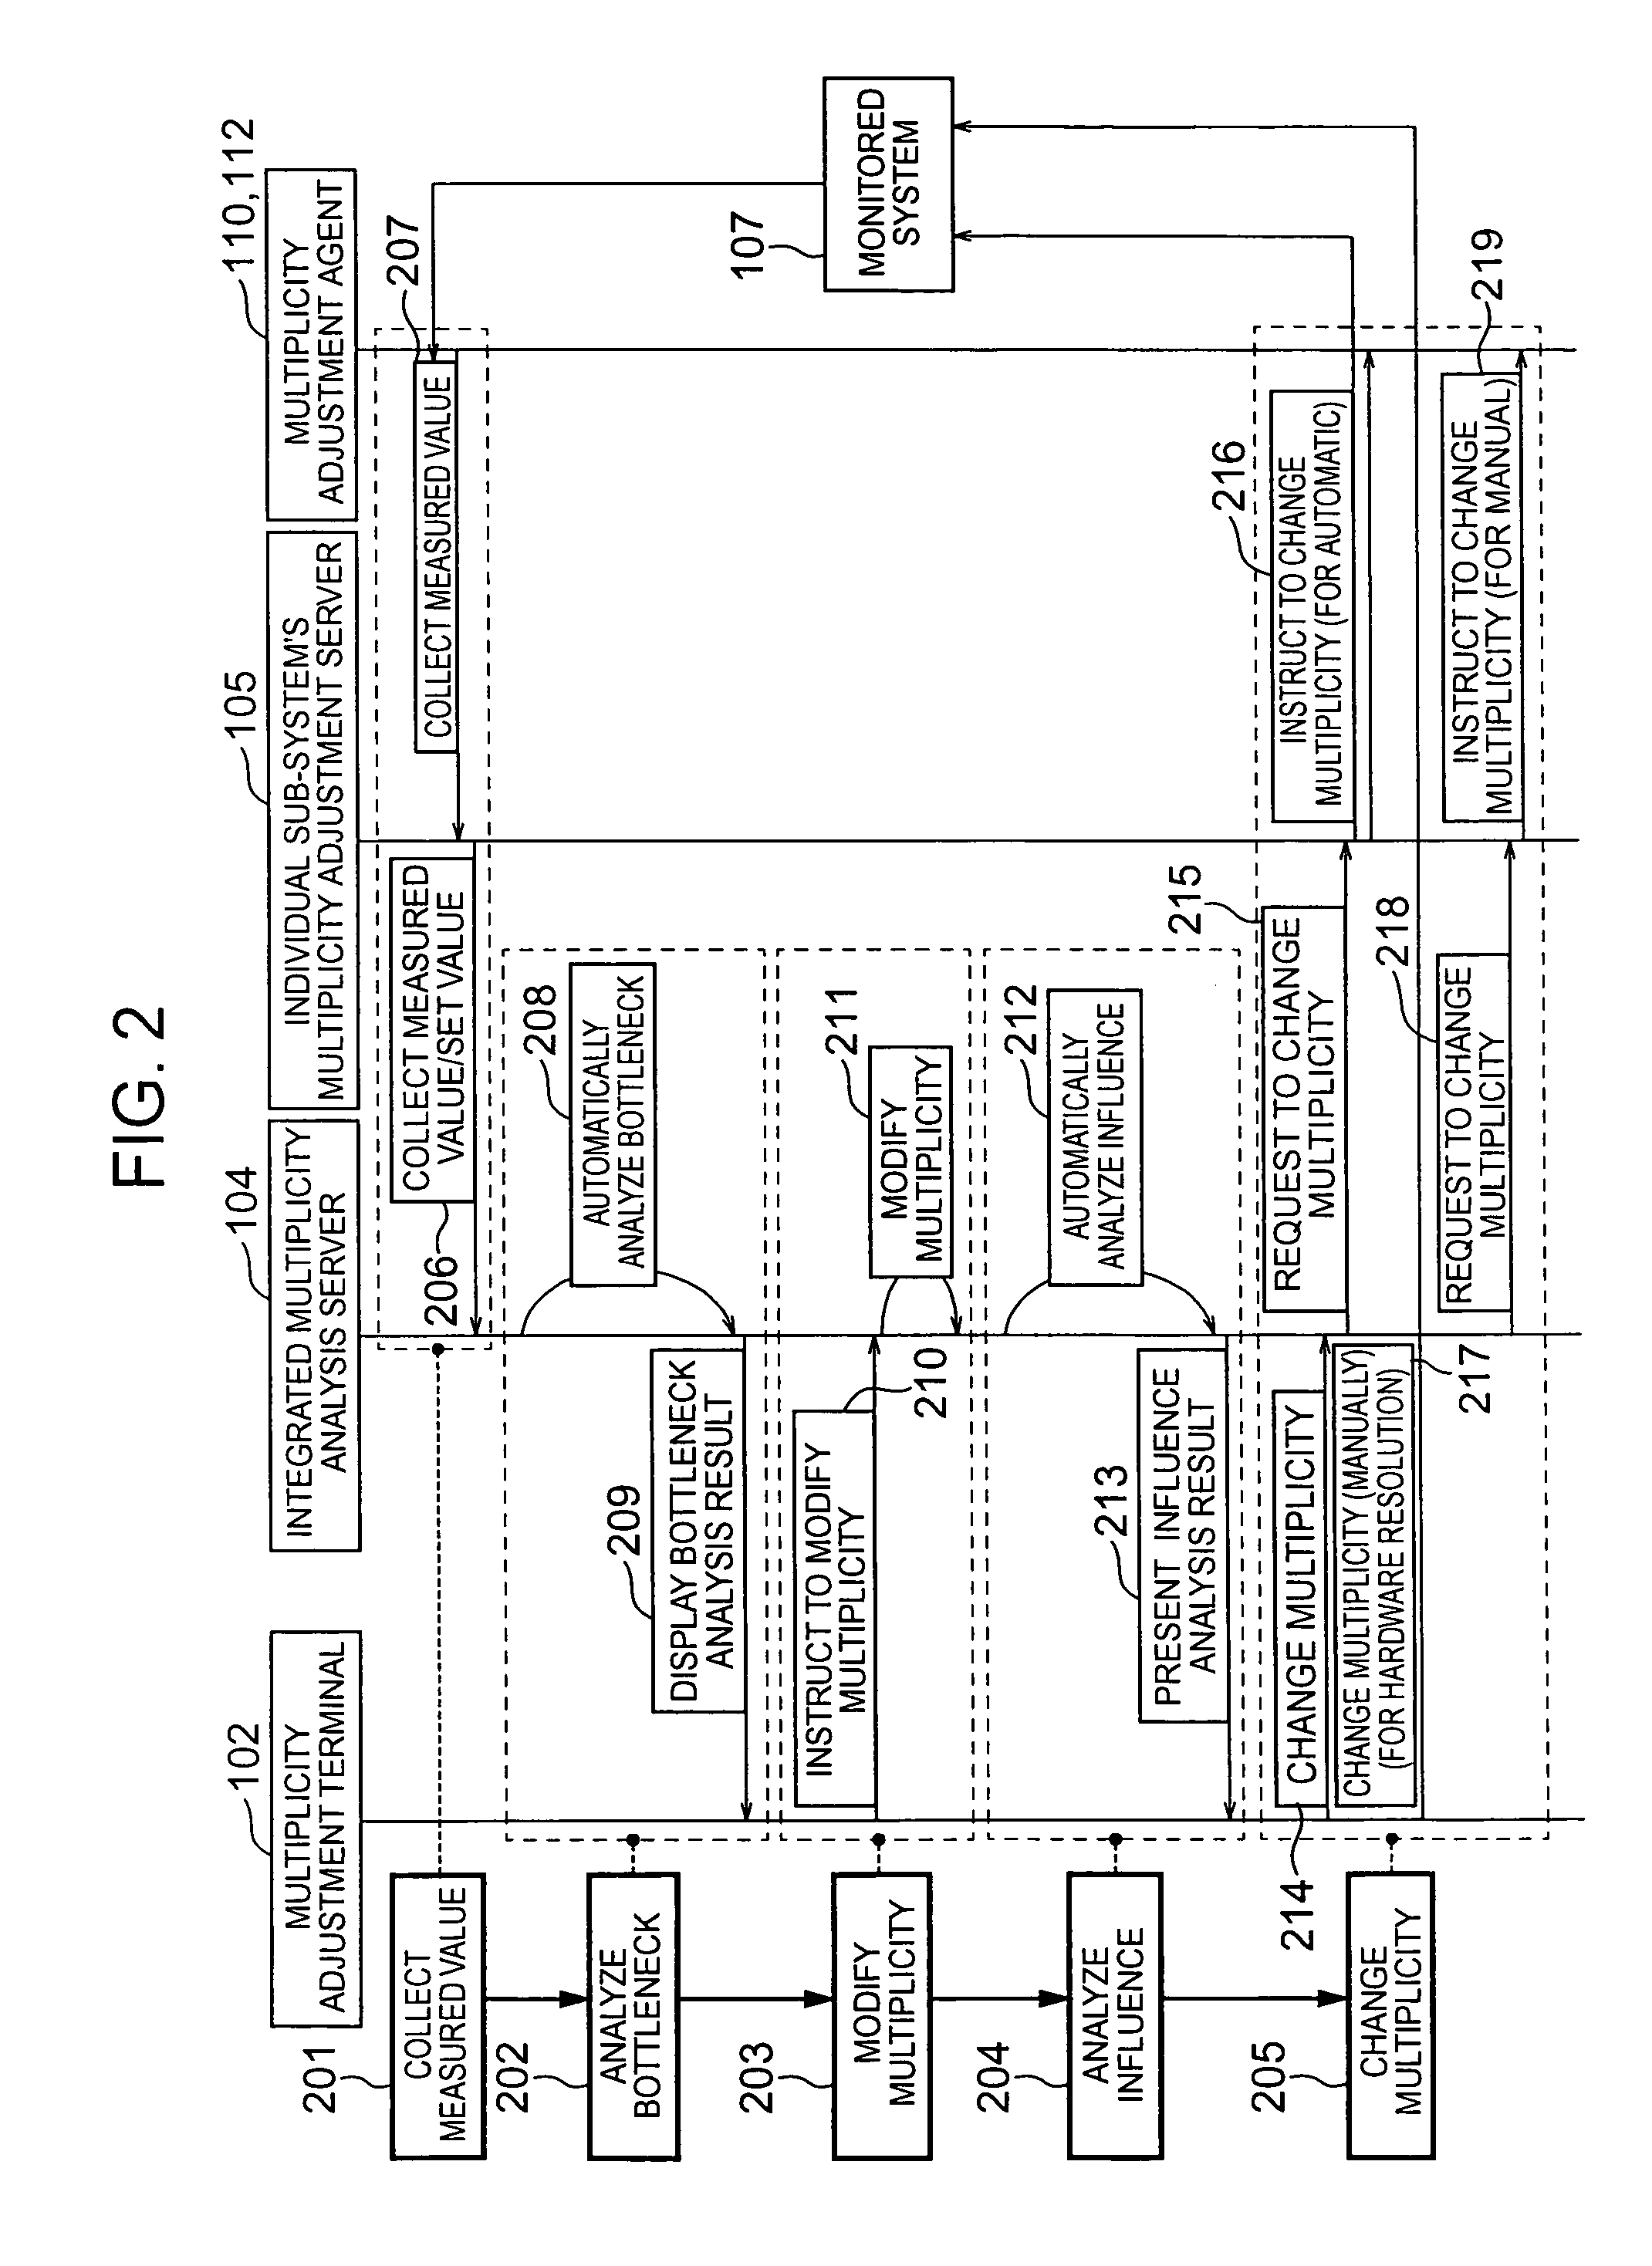 Multiplicity adjustment system and method